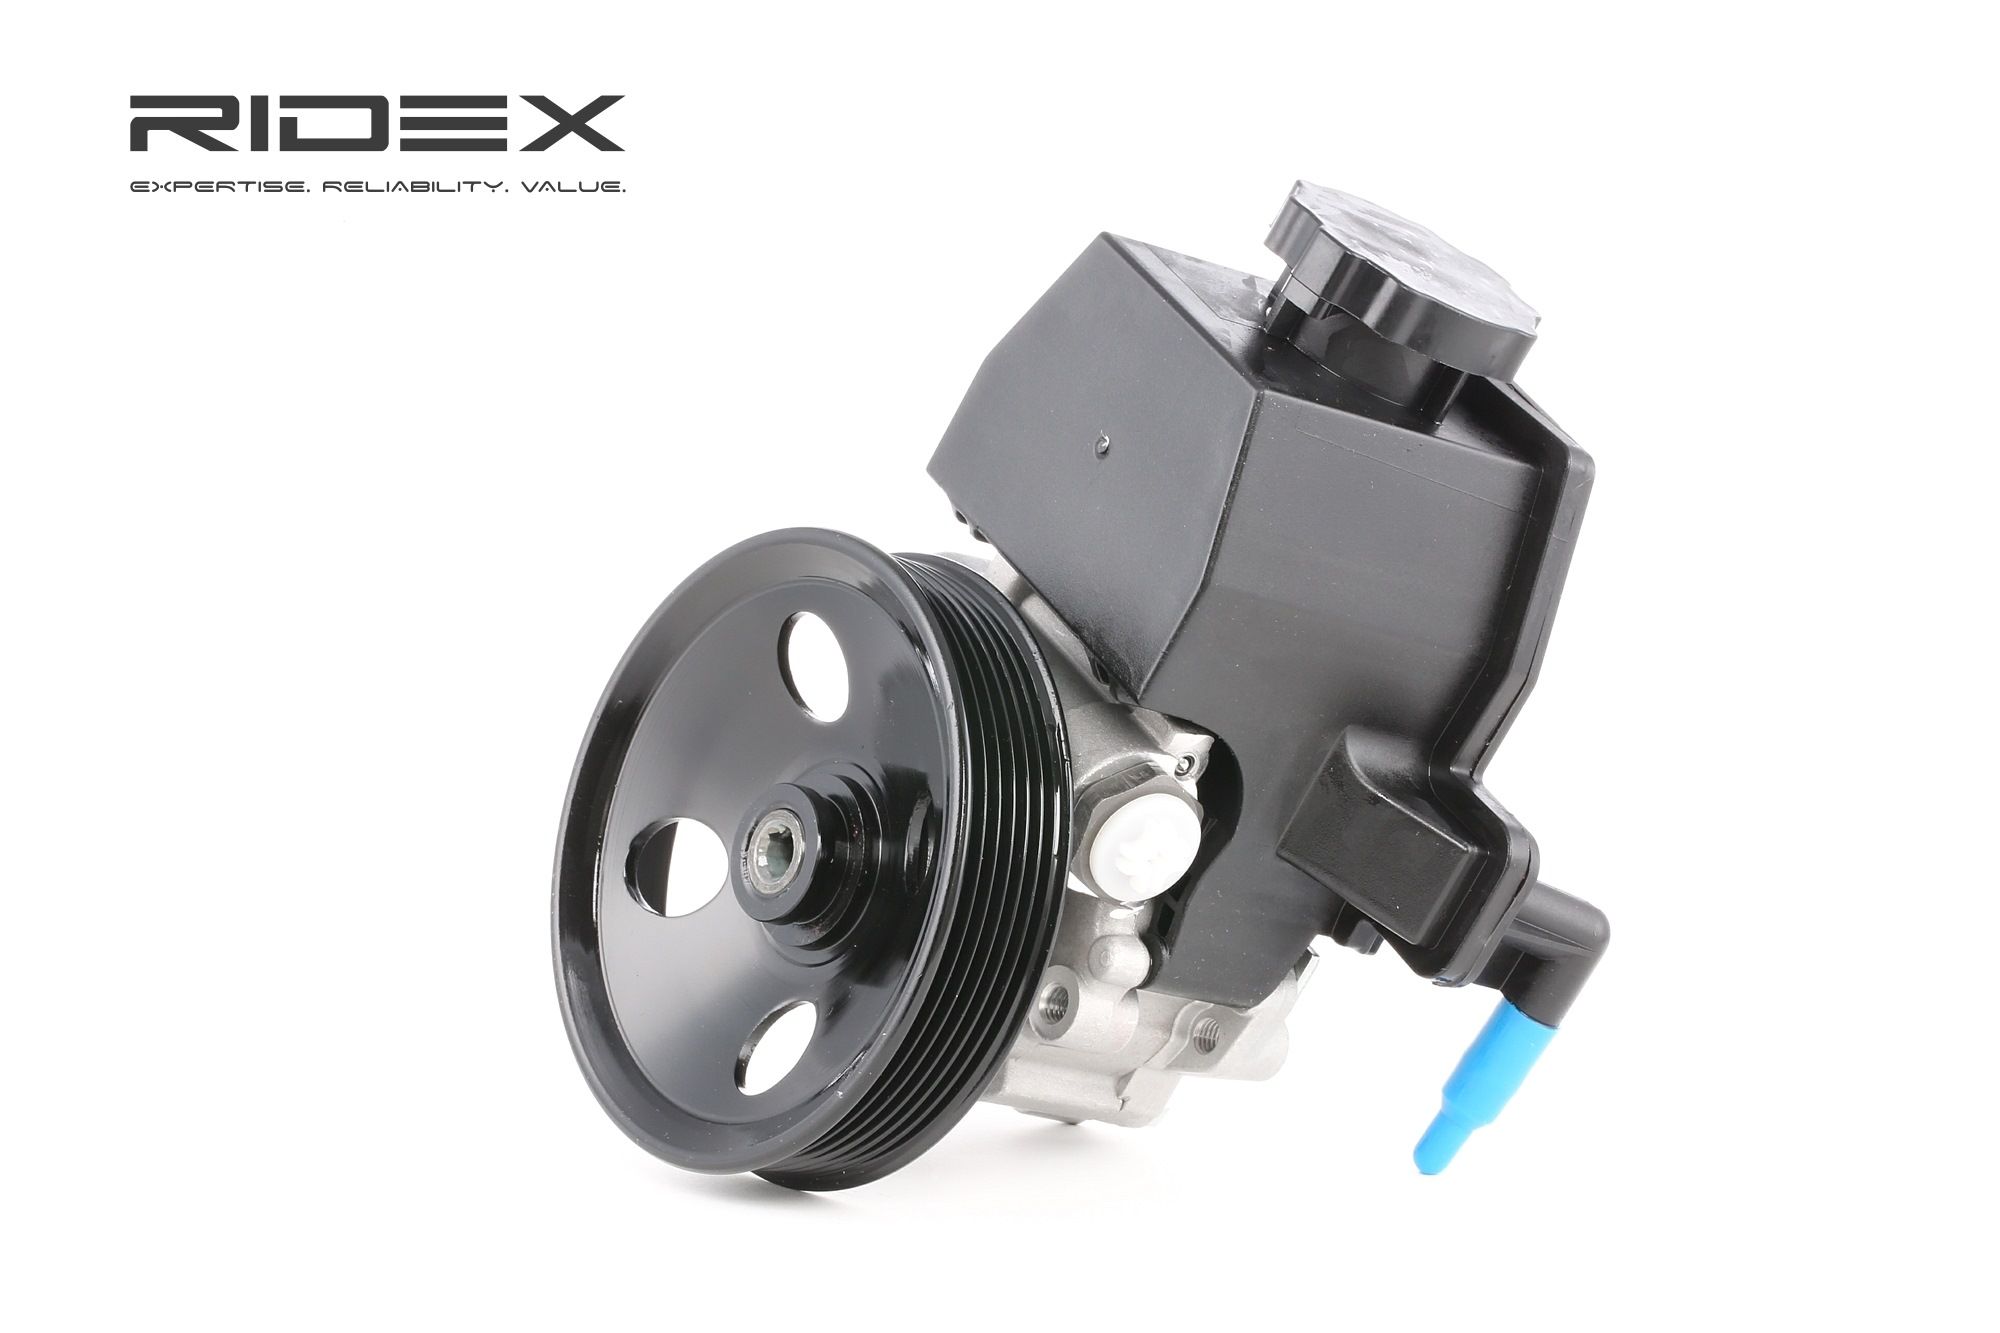 RIDEX 12H0026 Power steering pump Hydraulic, Number of ribs: 6, Belt Pulley Ø: 129 mm, 80 l/h